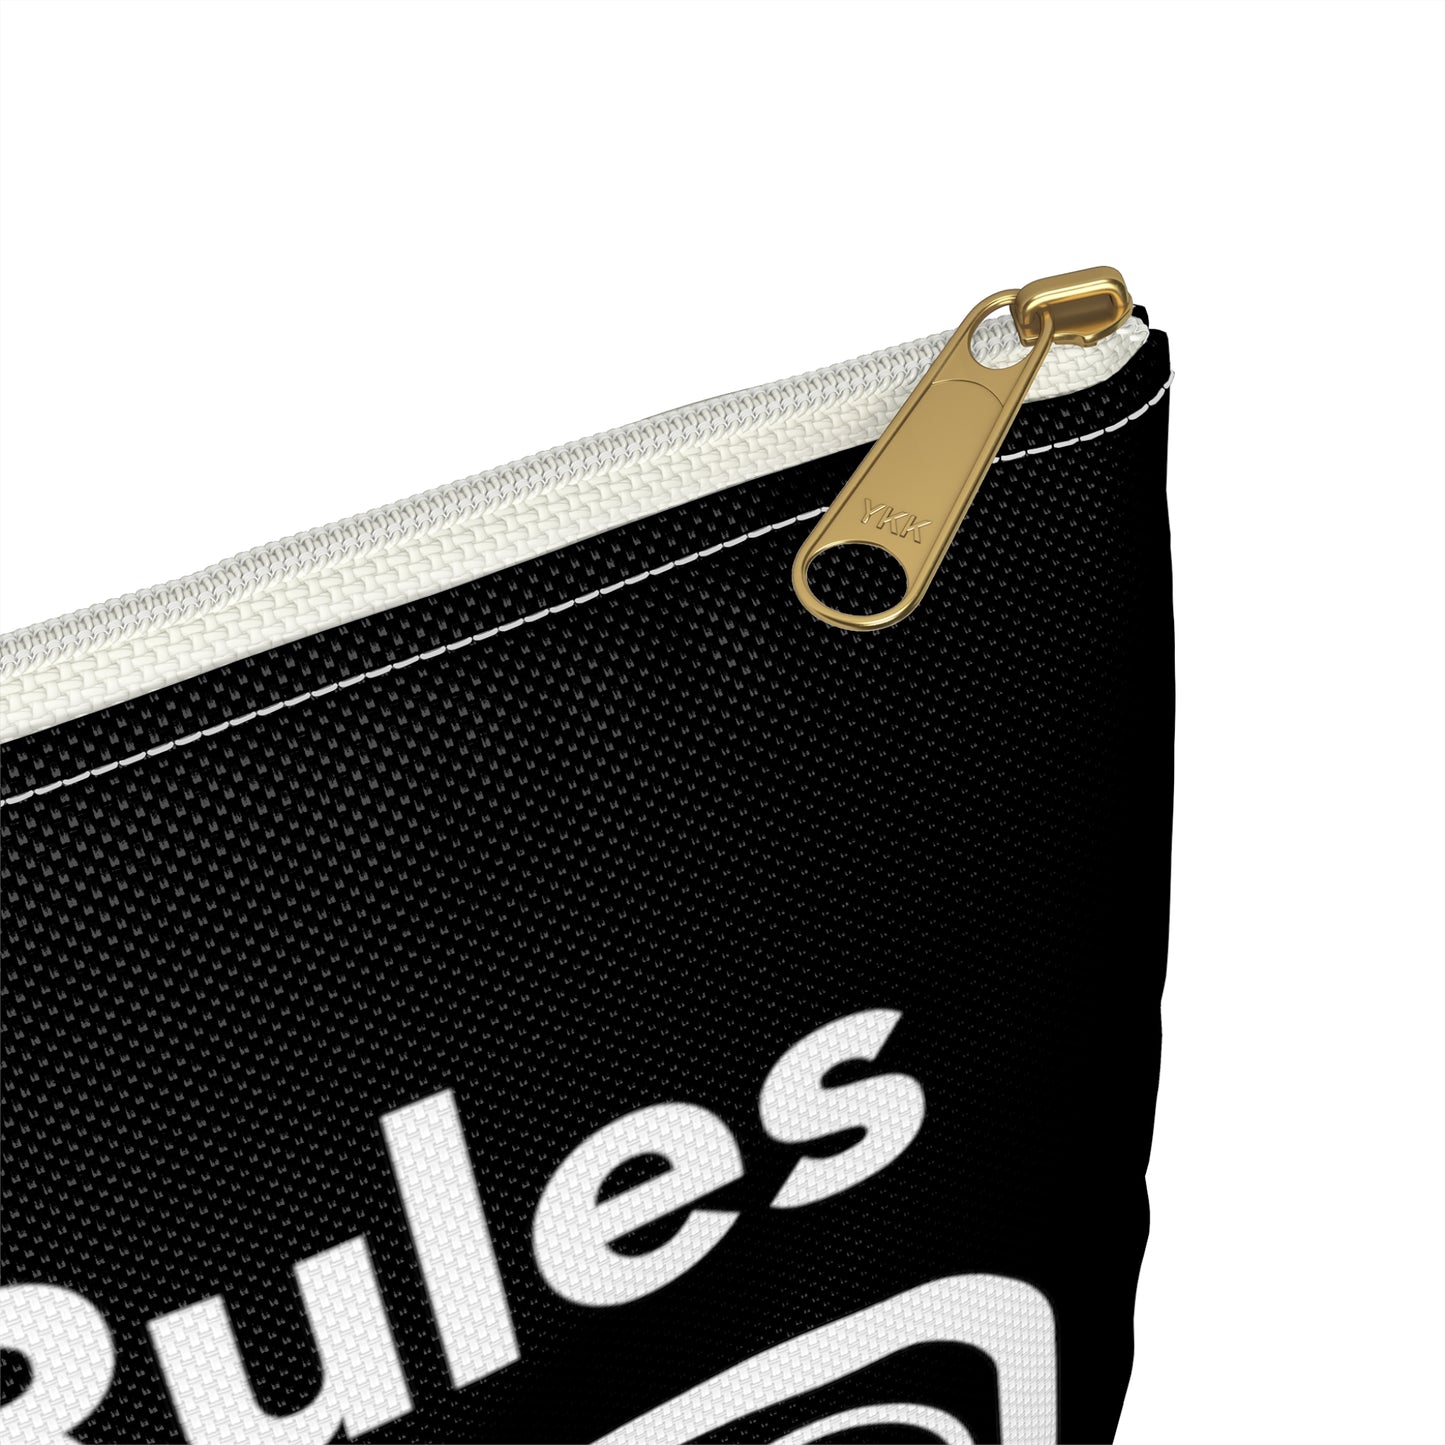 The Rules Pencil Case